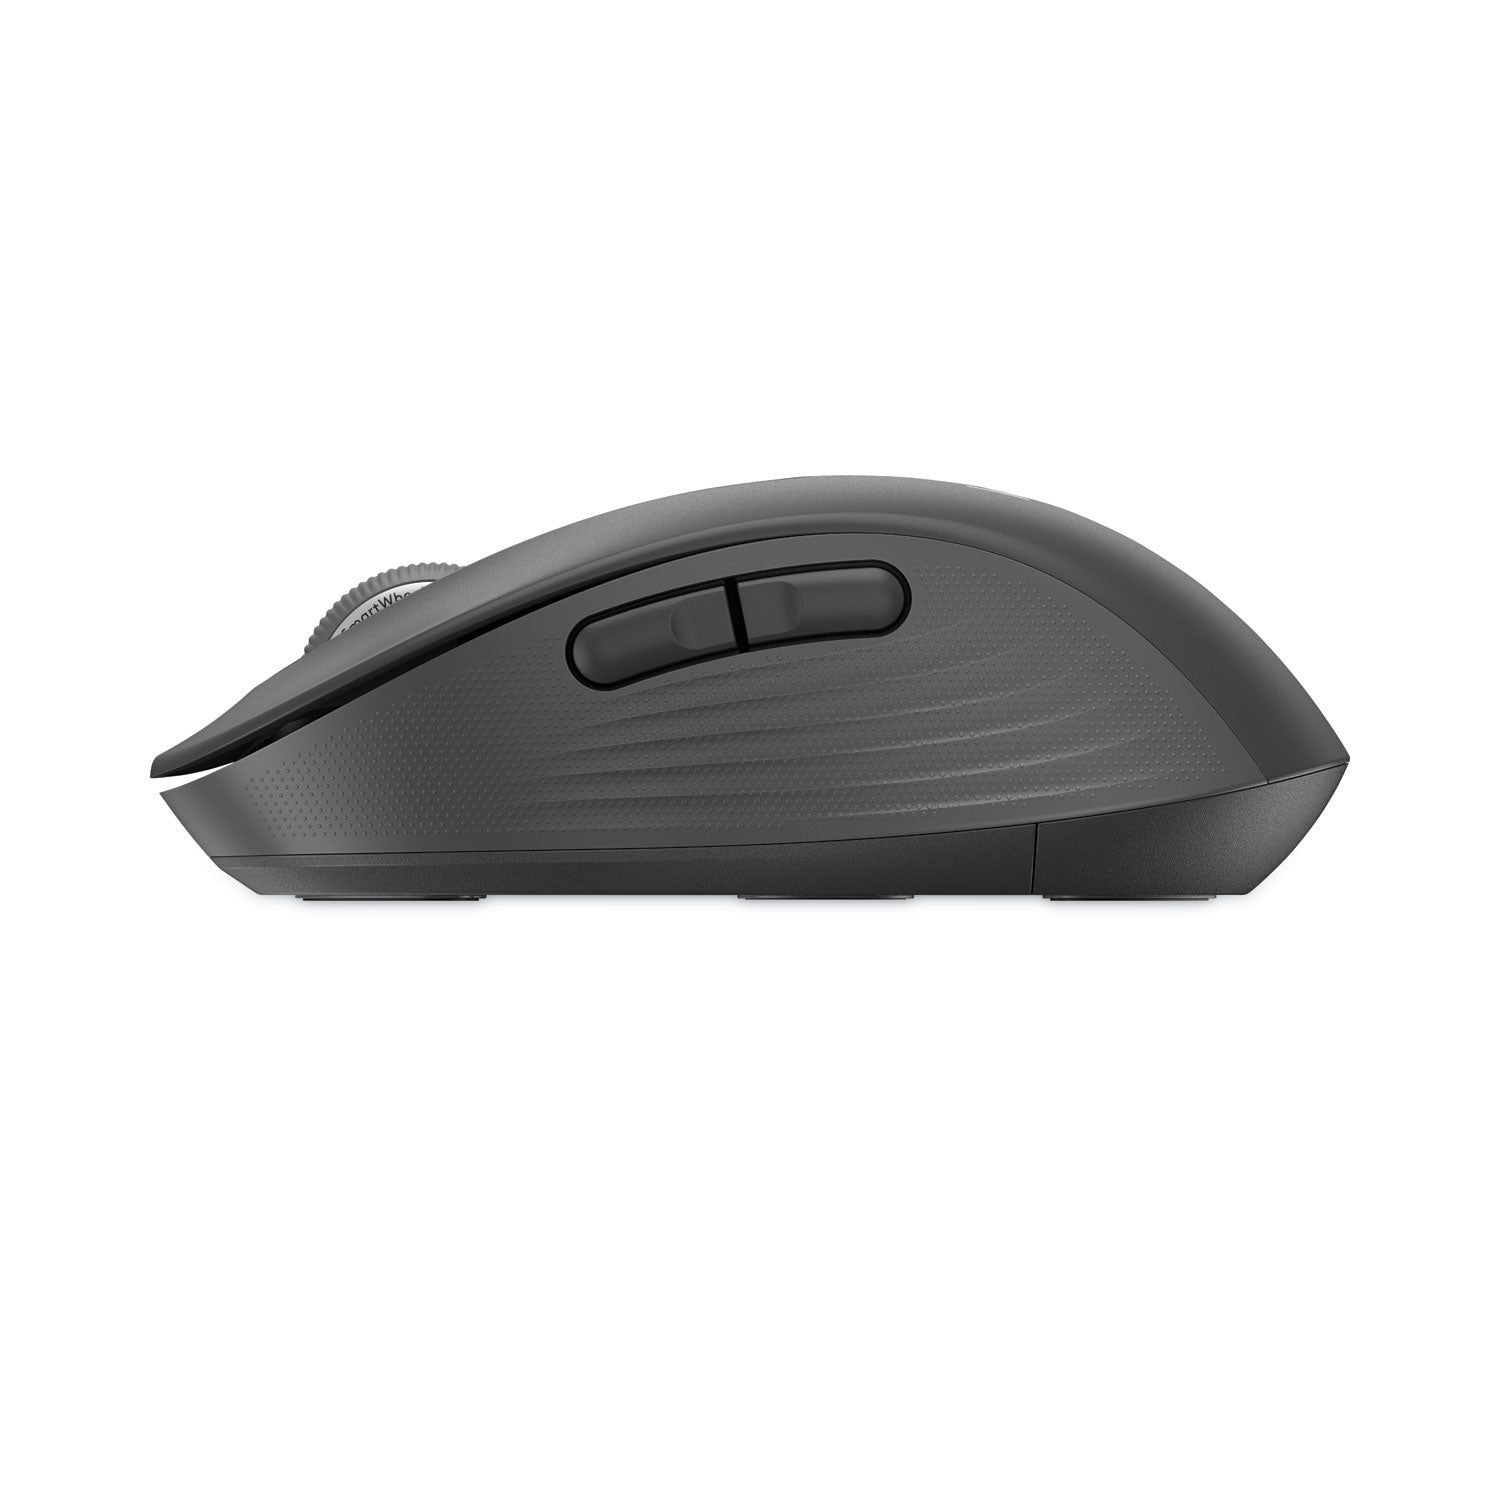 Signature M650 for Business Wireless Mouse, Medium, 2.4 GHz Frequency, 33 ft Wireless Range, Right Hand Use, Graphite - 3